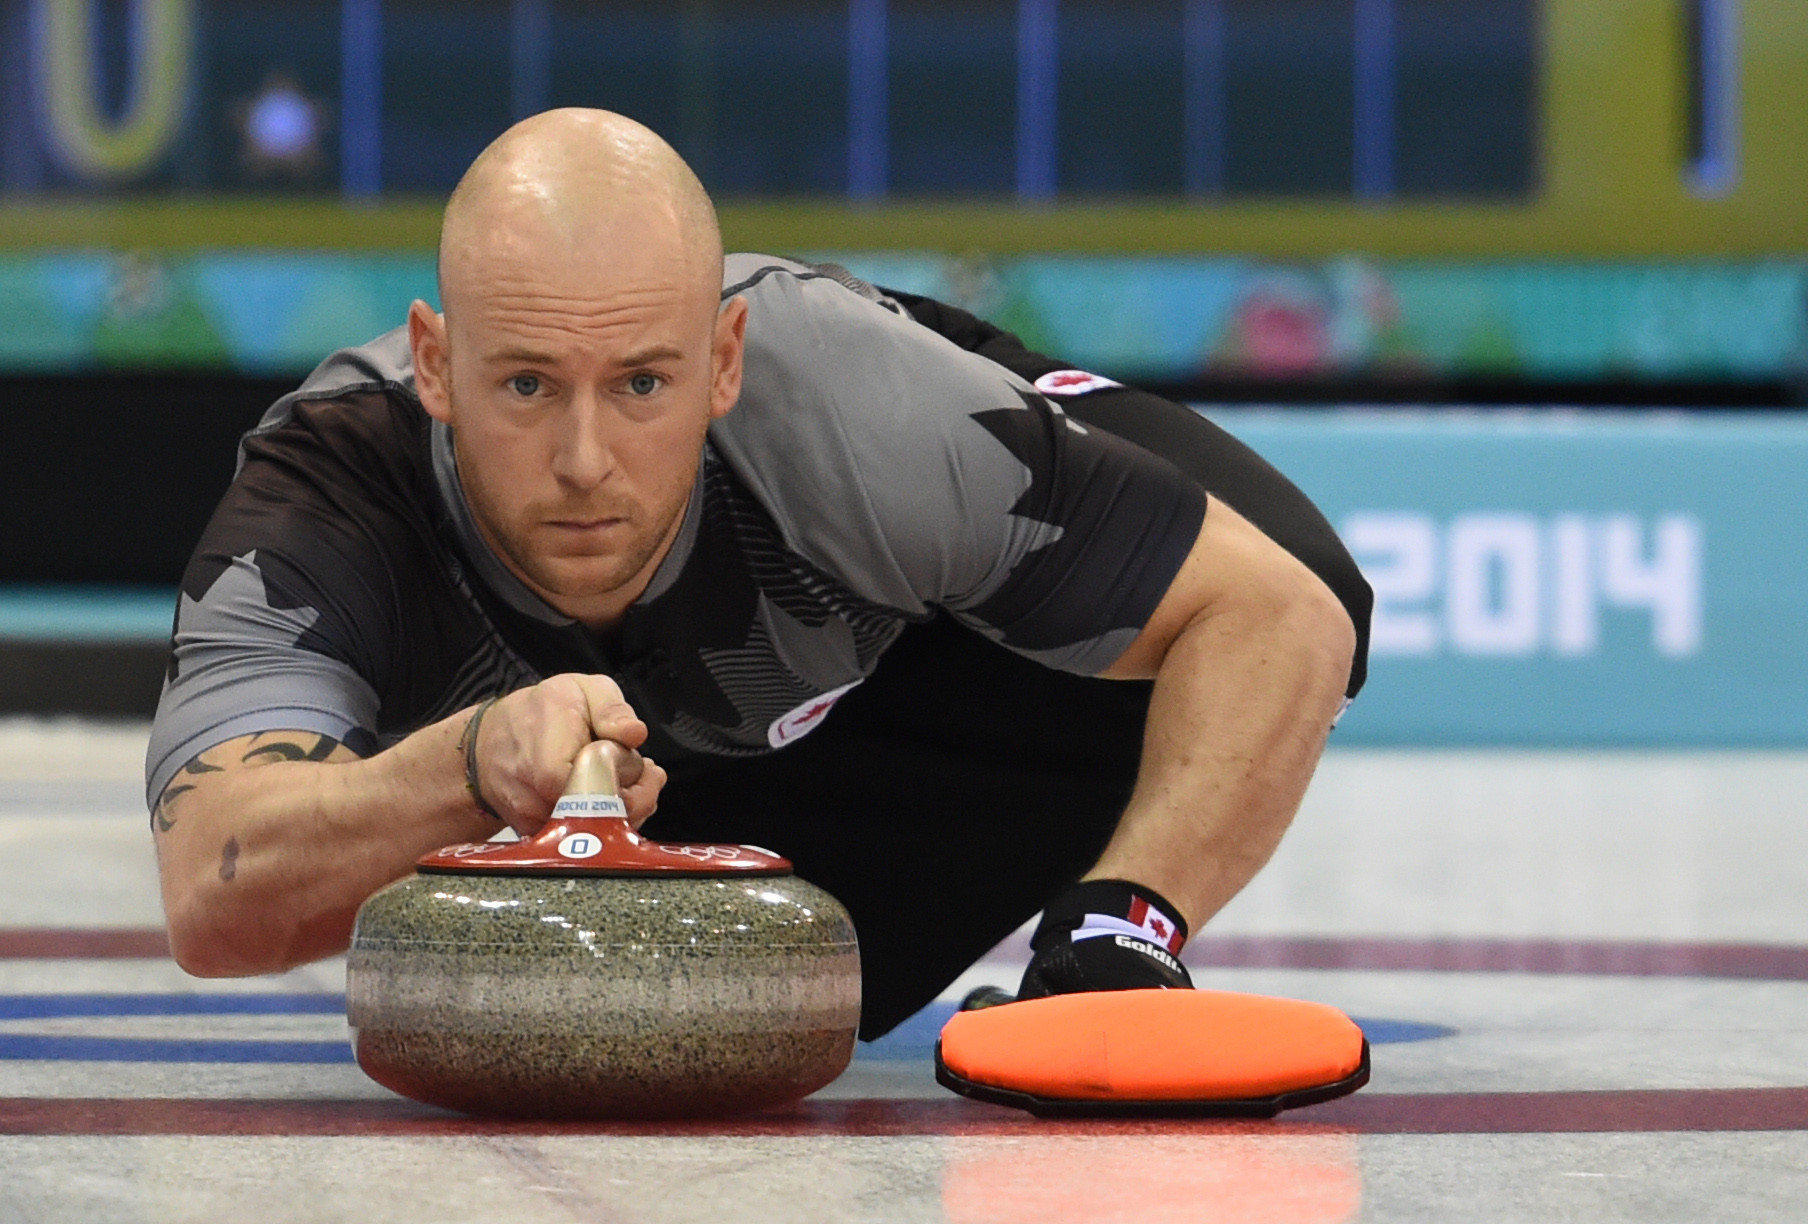 Canadian Olympic gold medalist disqualified from curling tournament for drunkenness  